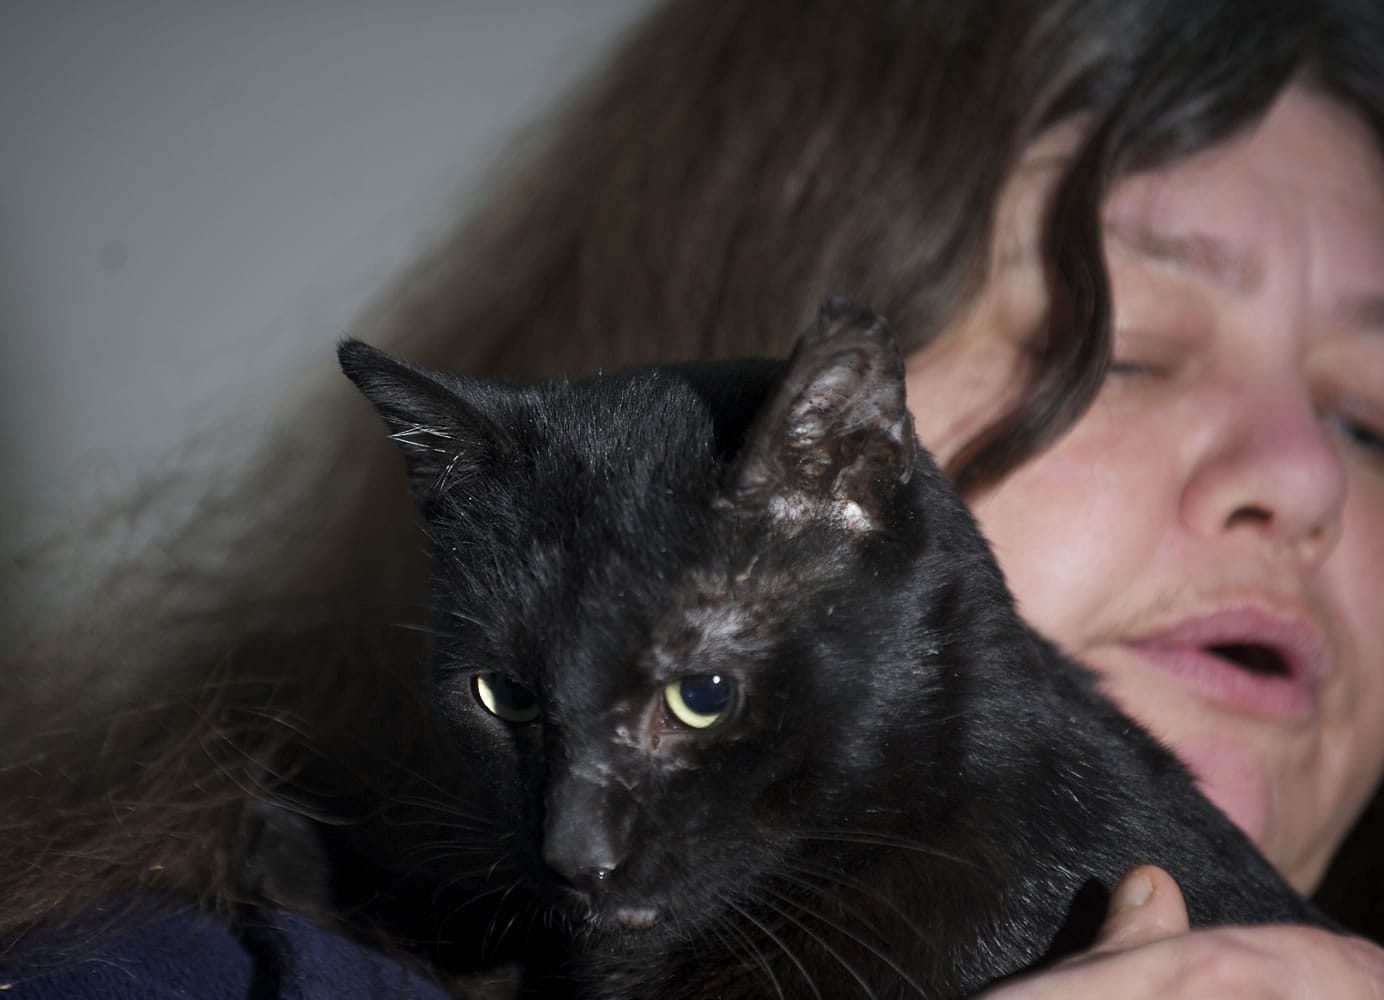 Julie Donahue-Hansen's therapy cat, Shade, went missing for two days about a week ago.